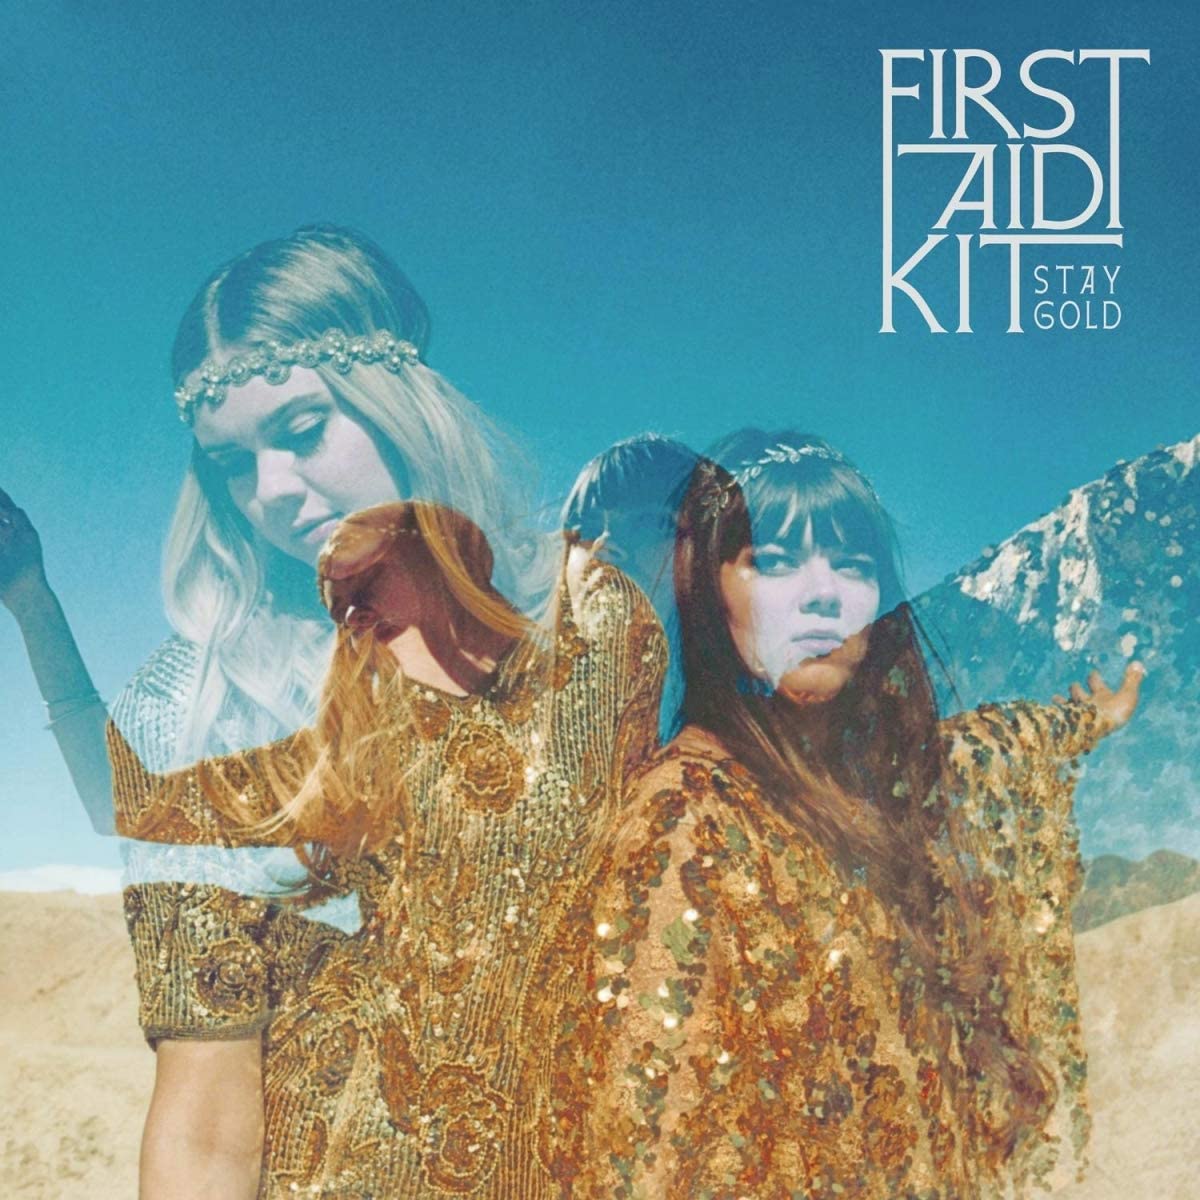 First Aid Kit Stay Gold - Ireland Vinyl